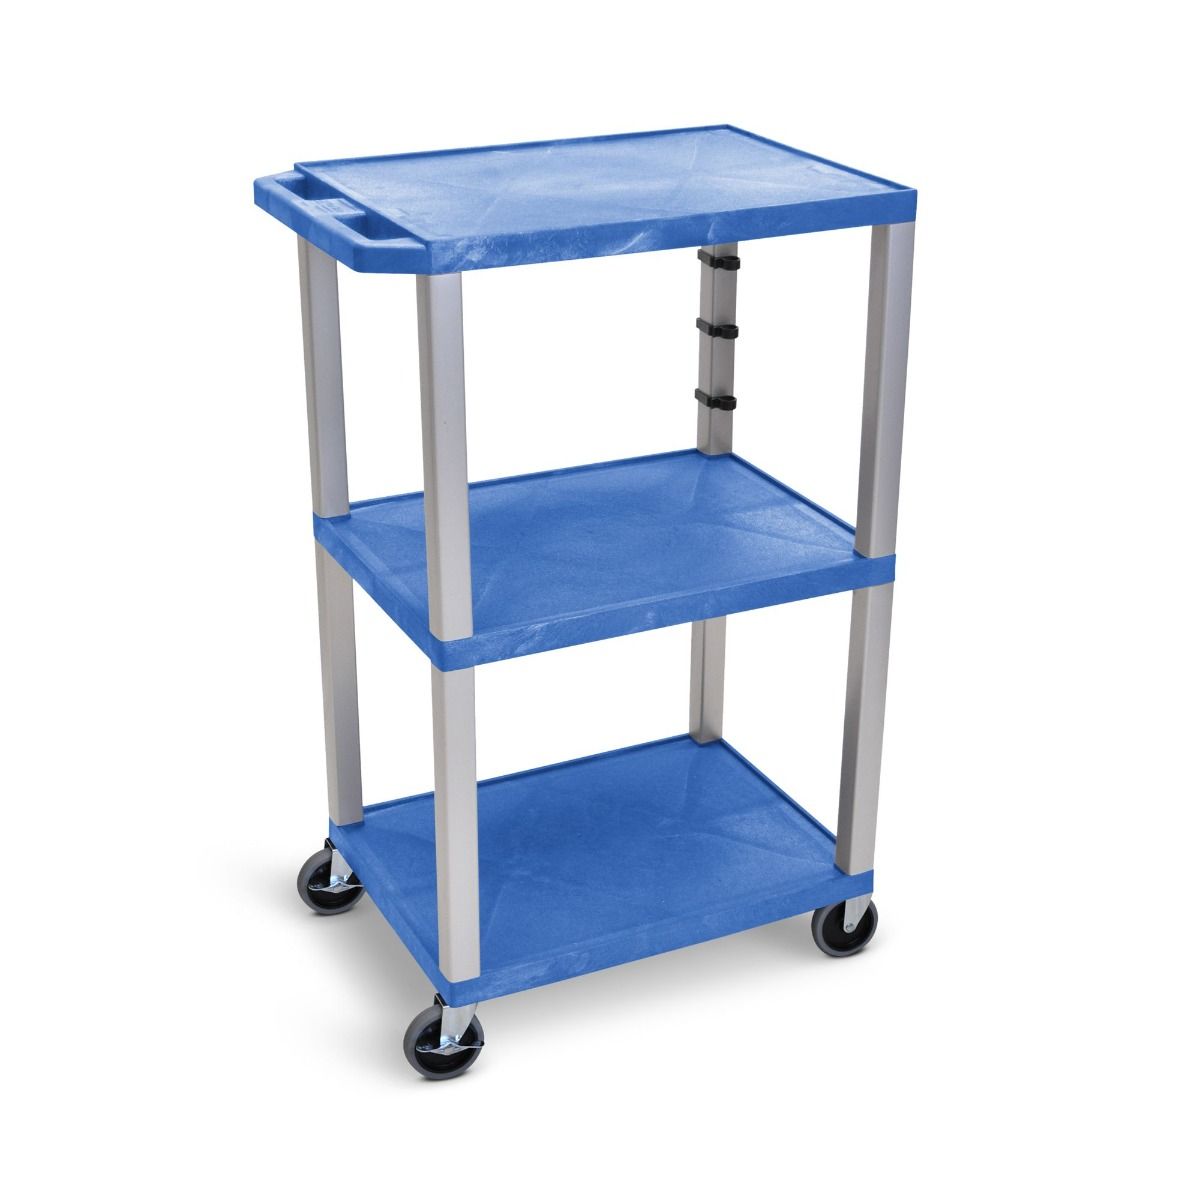 Luxor 42" High 3-Shelf Utility Cart [w/ 3-Outlet Electrical Assembly, Blue Shelves, Nickel Legs] - UCPL1BUE-N Image 1